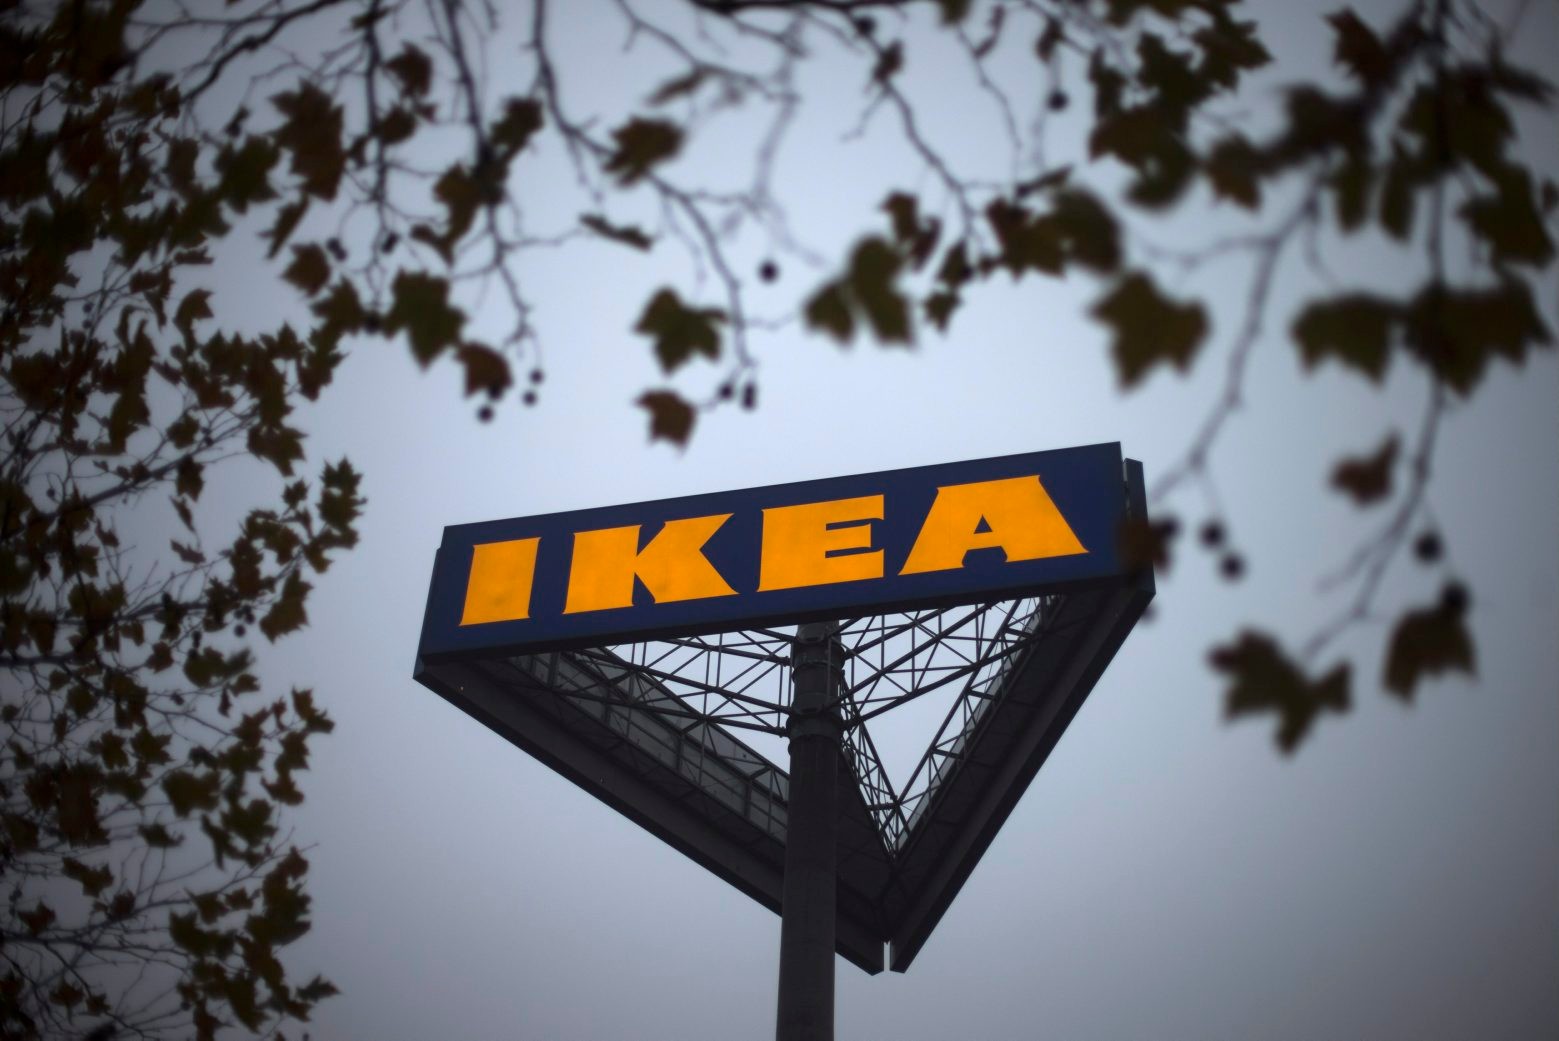 FILE - In this Nov. 16, 2012 file photo, a sign bearing the Ikea logo is seen outside a store in Berlin. The Czech veterinary authority said Monday, Feb. 25, 2013 it detected horse meat in meat balls labeled as beef and pork imported to the country by Sweden's furniture retailer giant Ikea. The State Veterinary Administration says the one-kilogram packs of the frozen meat balls were made in Sweden to be sold in Ikea's furniture stores that also offer typical Swedish food. (AP Photo/Markus Schreiber, File) Czech Republic Europe Horse Meat